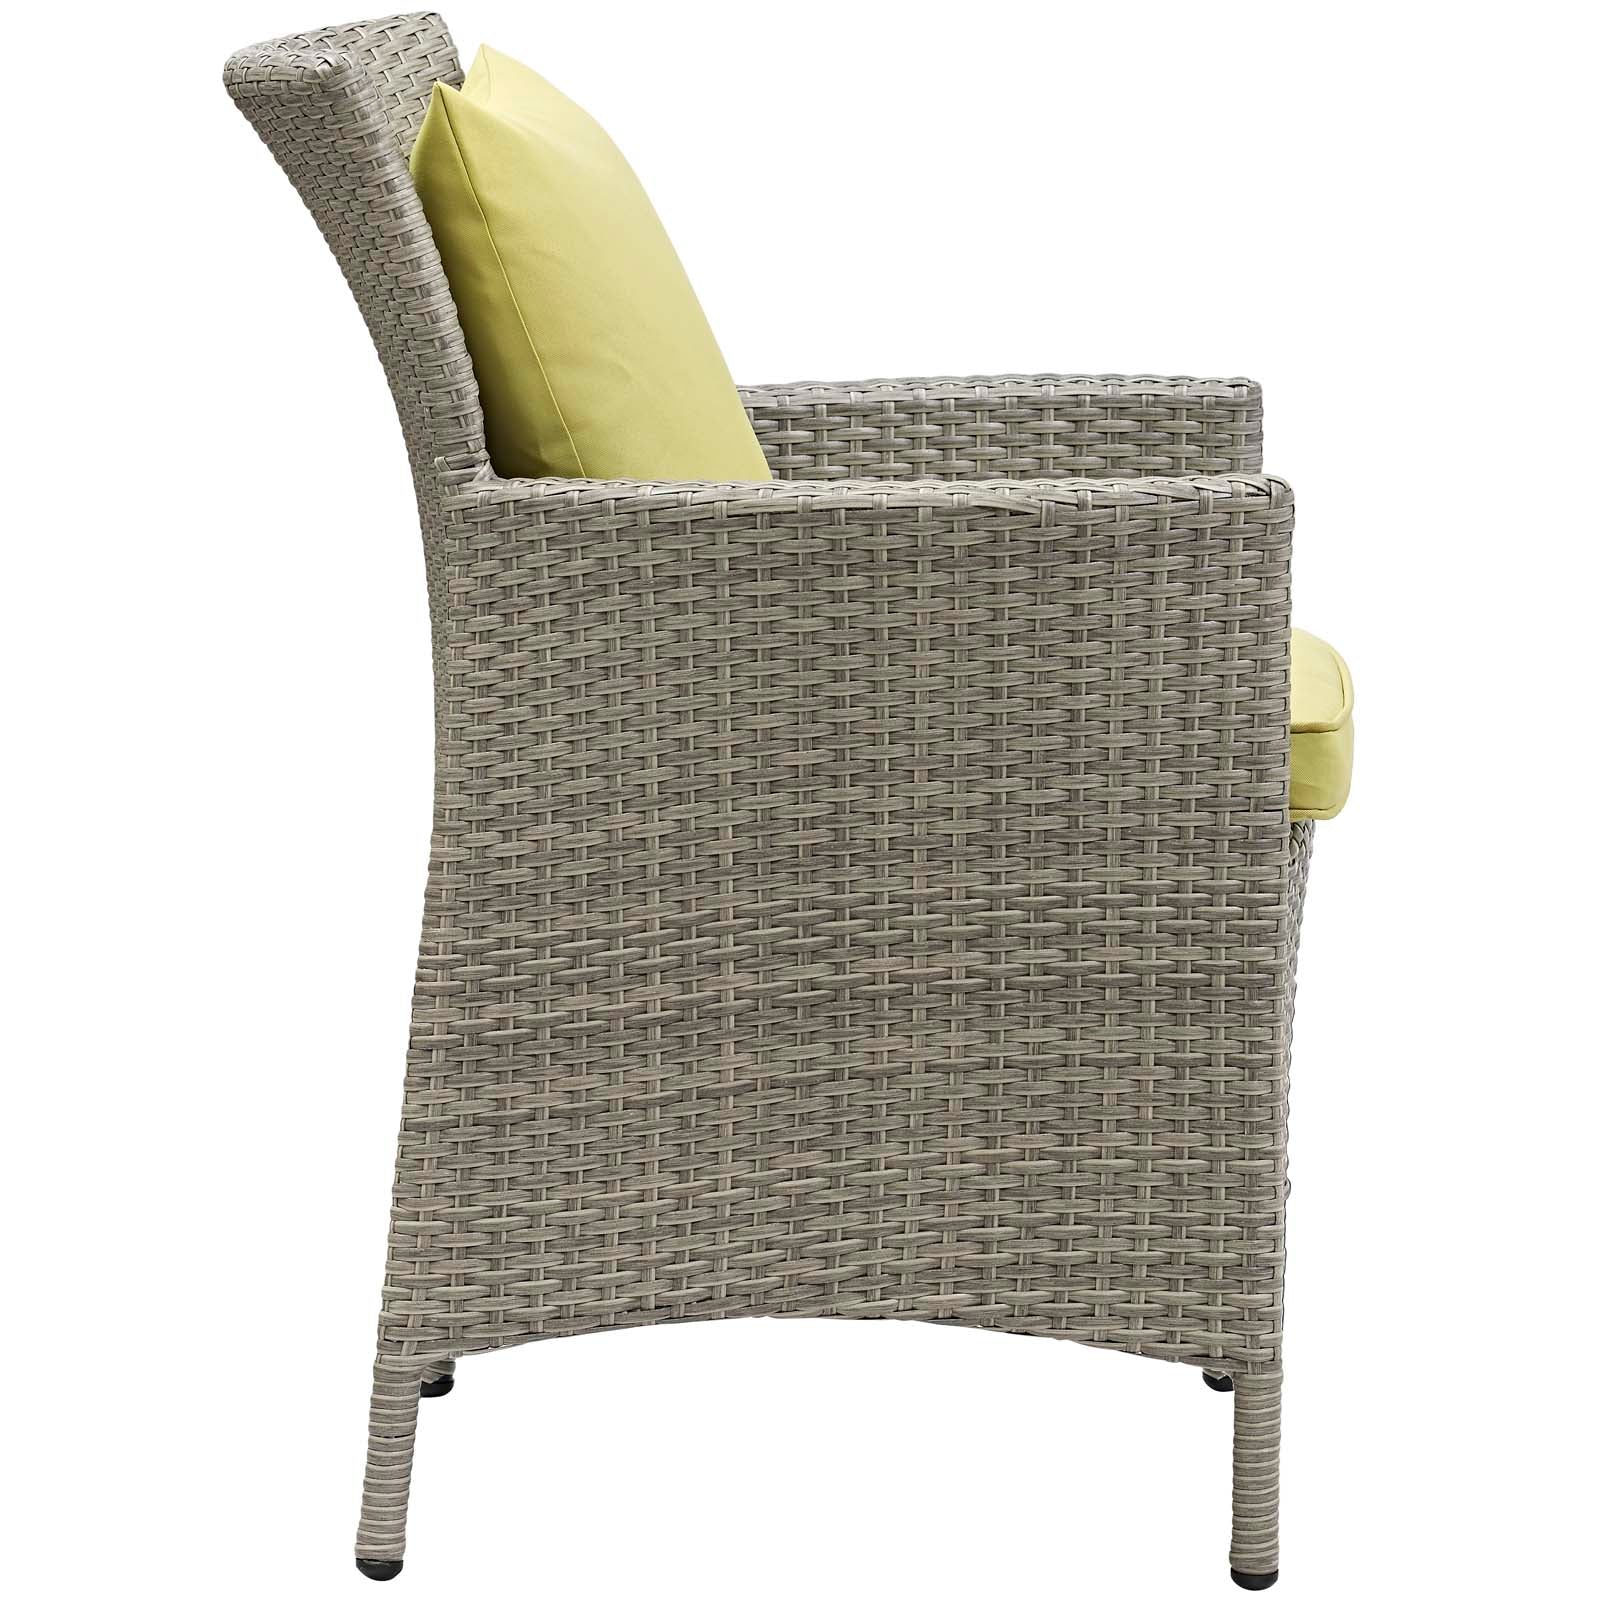 Modway Outdoor Dining Chairs - Conduit Outdoor Patio Wicker Rattan Dining Armchair Light Gray Peridot